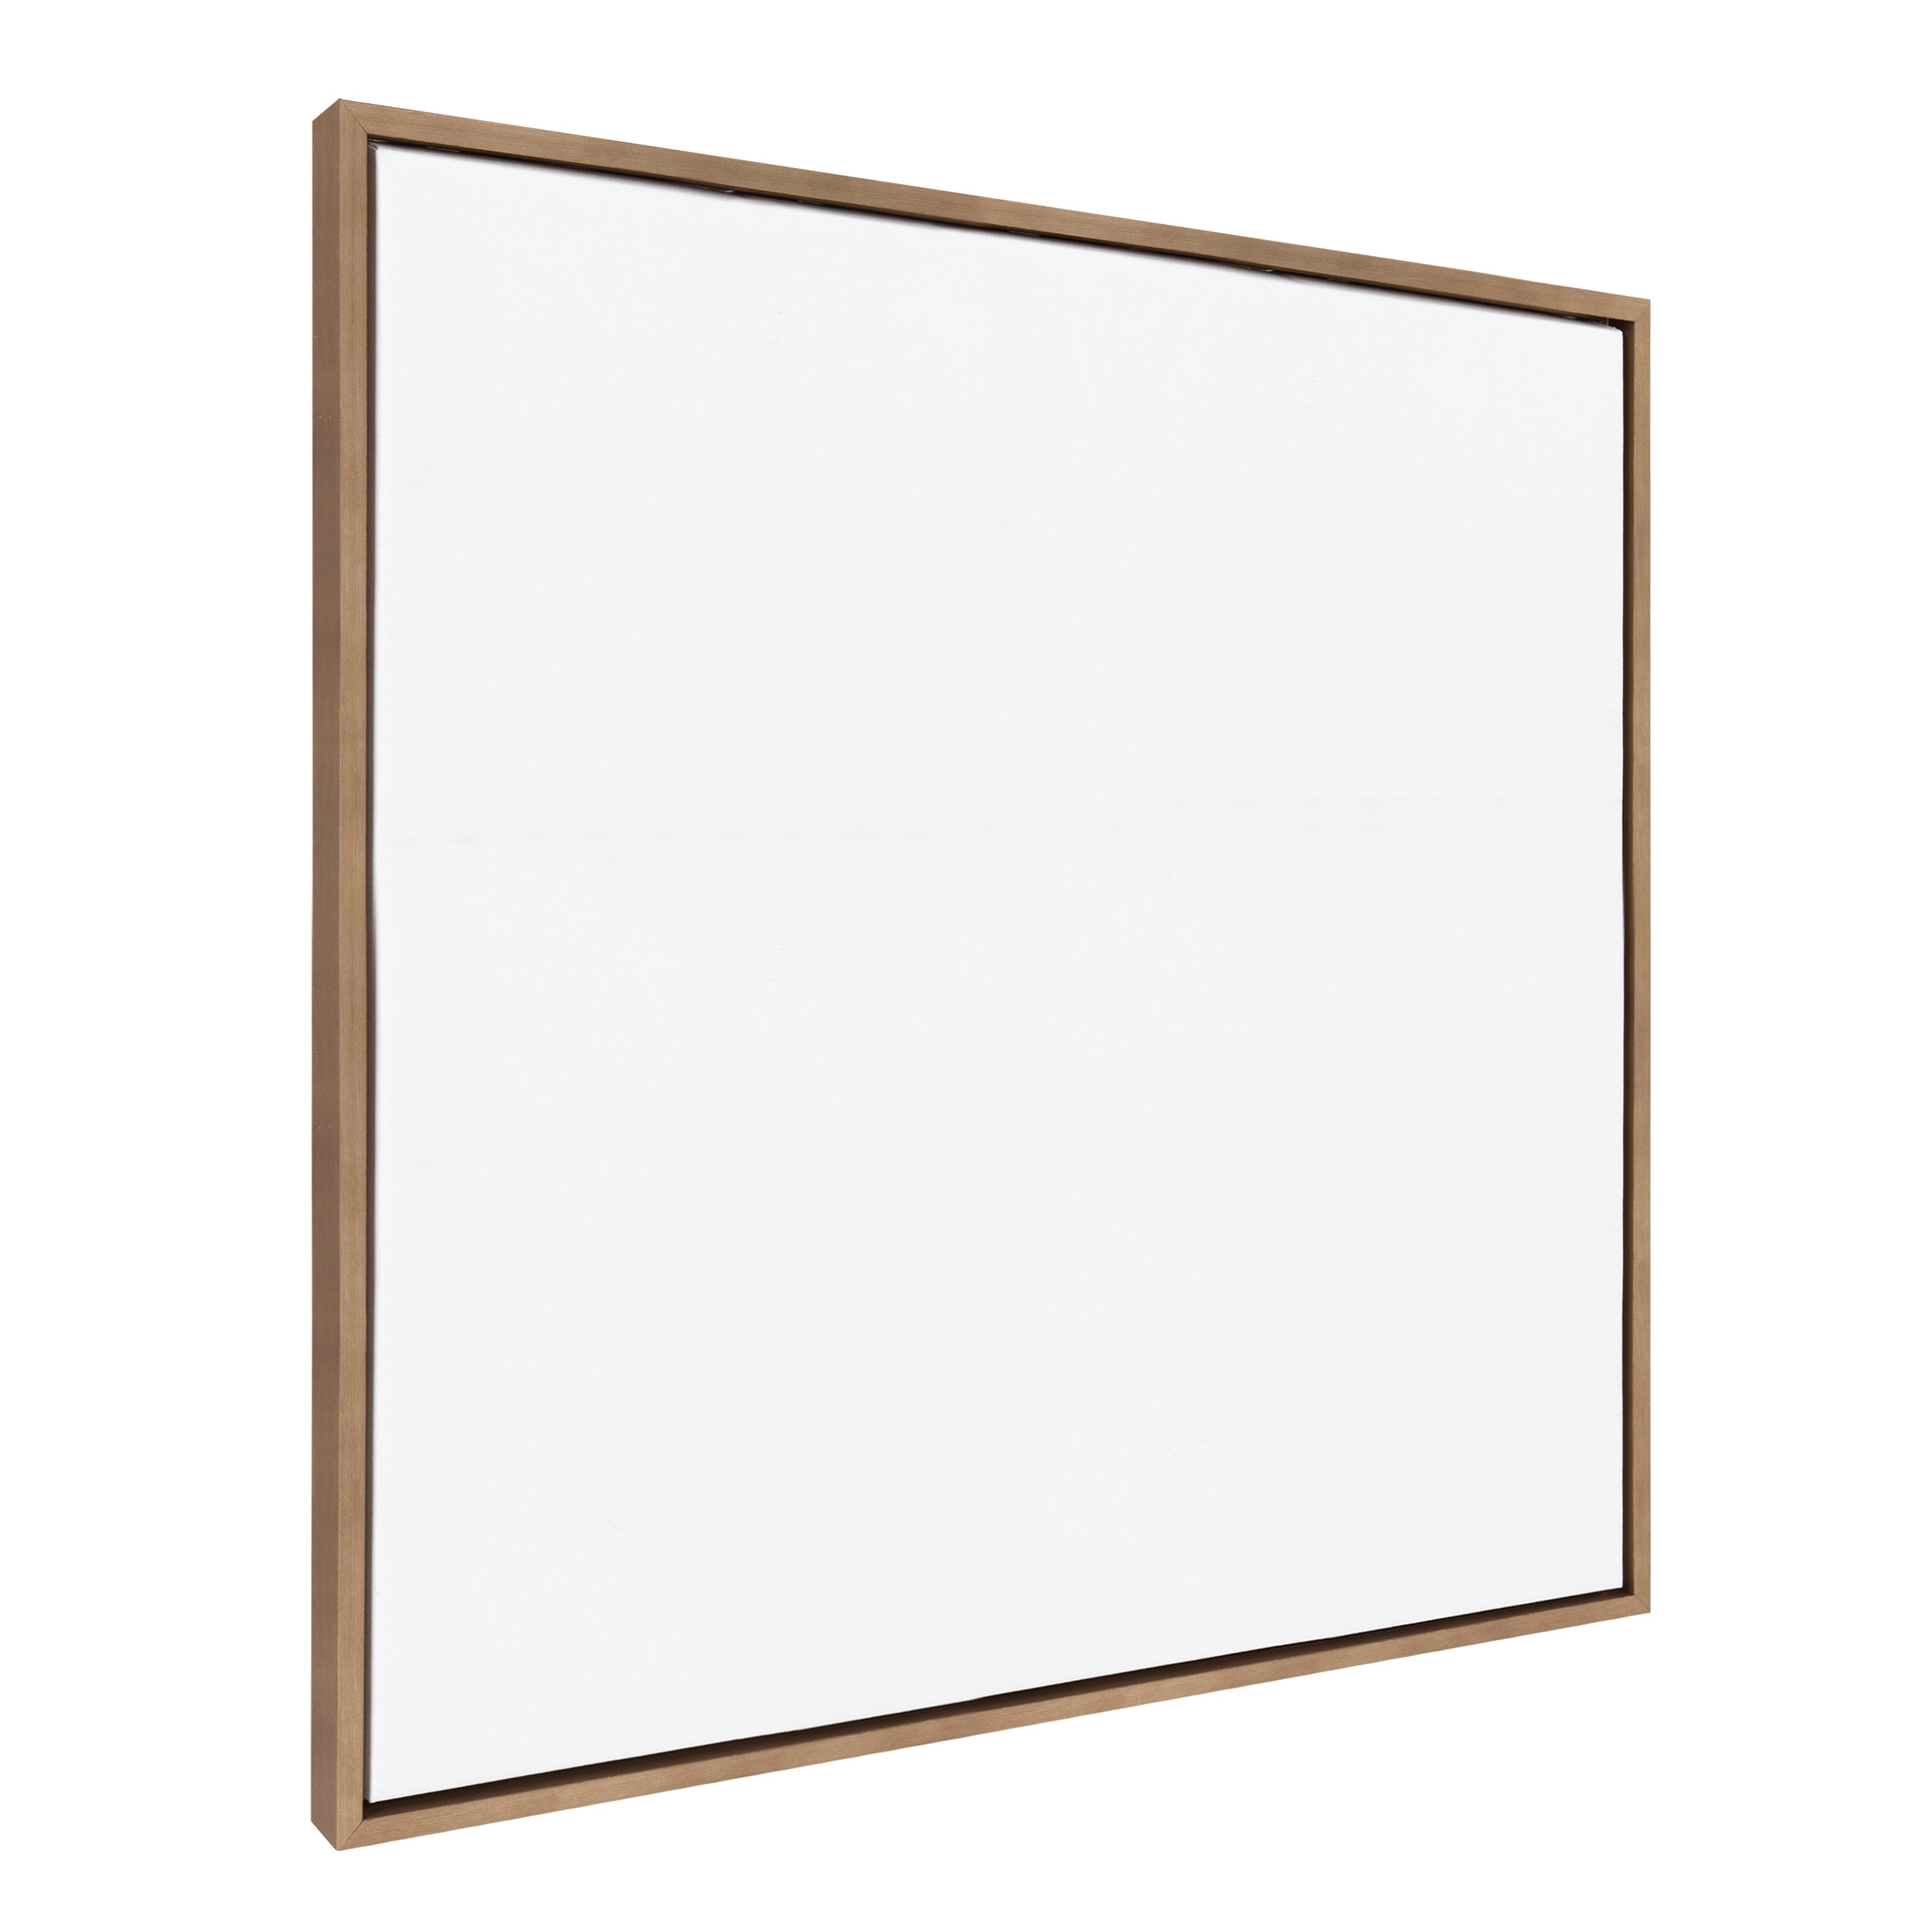 Kate and Laurel Sylvie Blank Framed Canvas Wall Art, 18x40 Gold, Modern Empty Canvas for Paint-Your-Own Art, Premium Canvas Already Framed